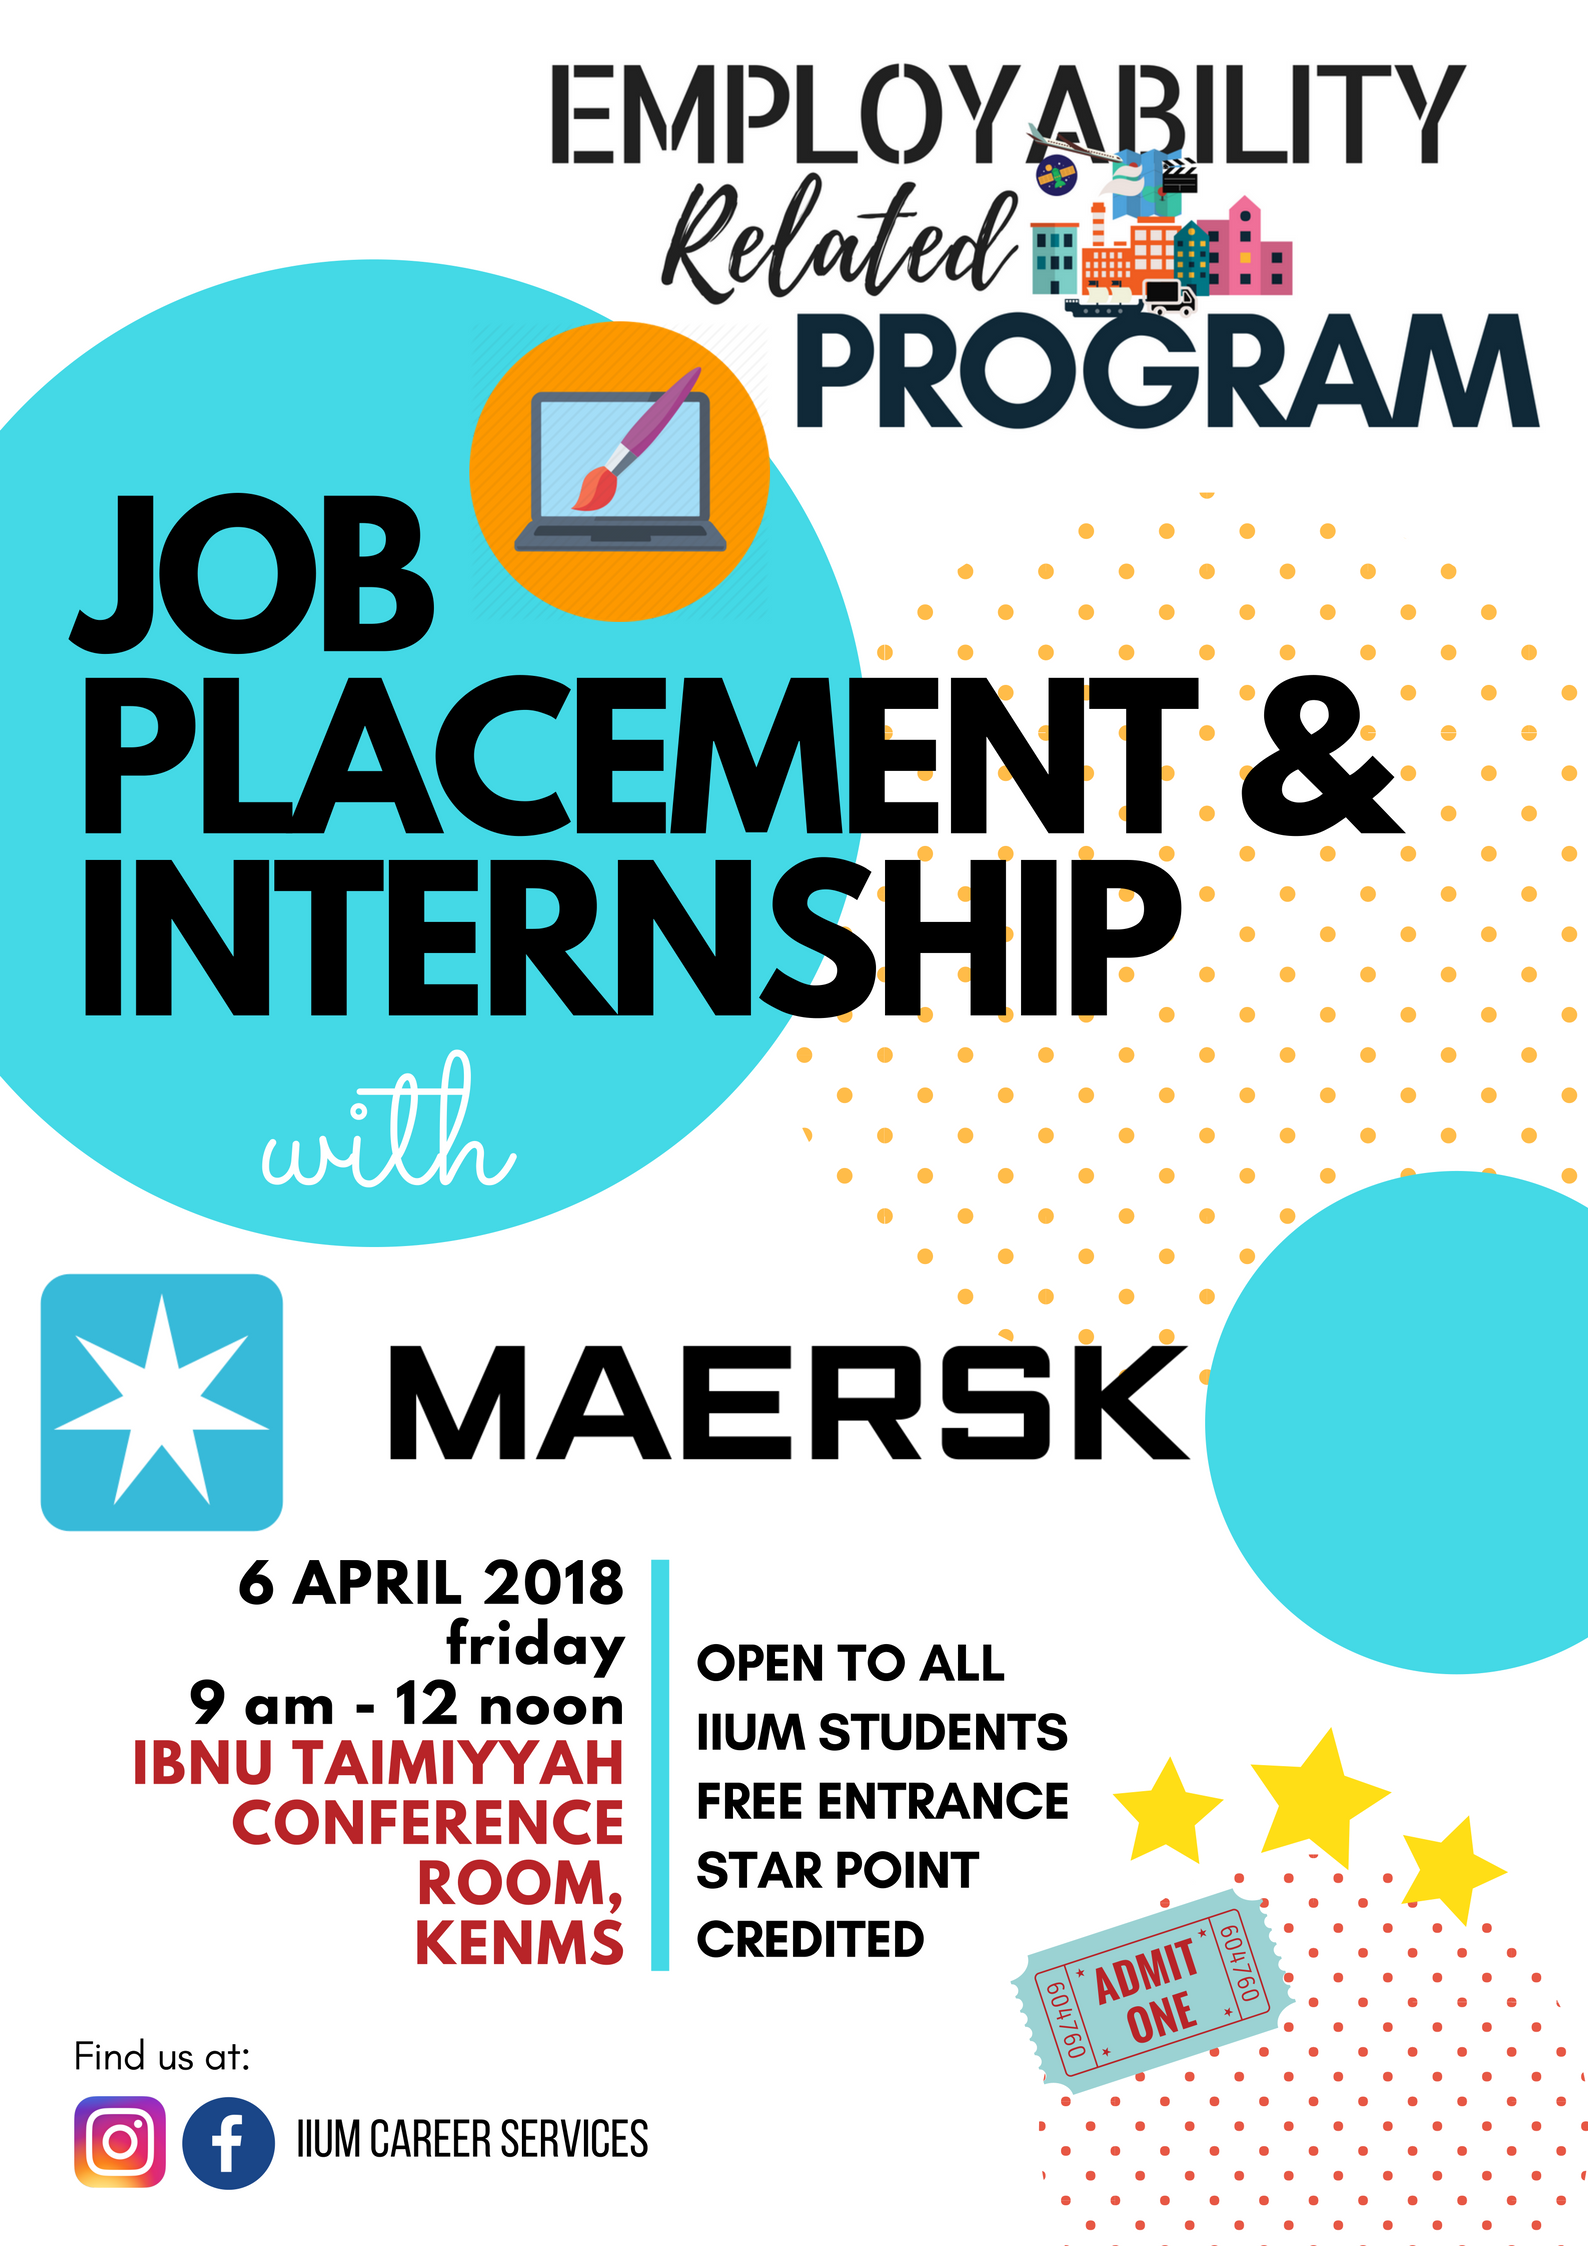 CAREER TALK - JOB PLACEMENT AND INTERNSHIP WITH MAERSK